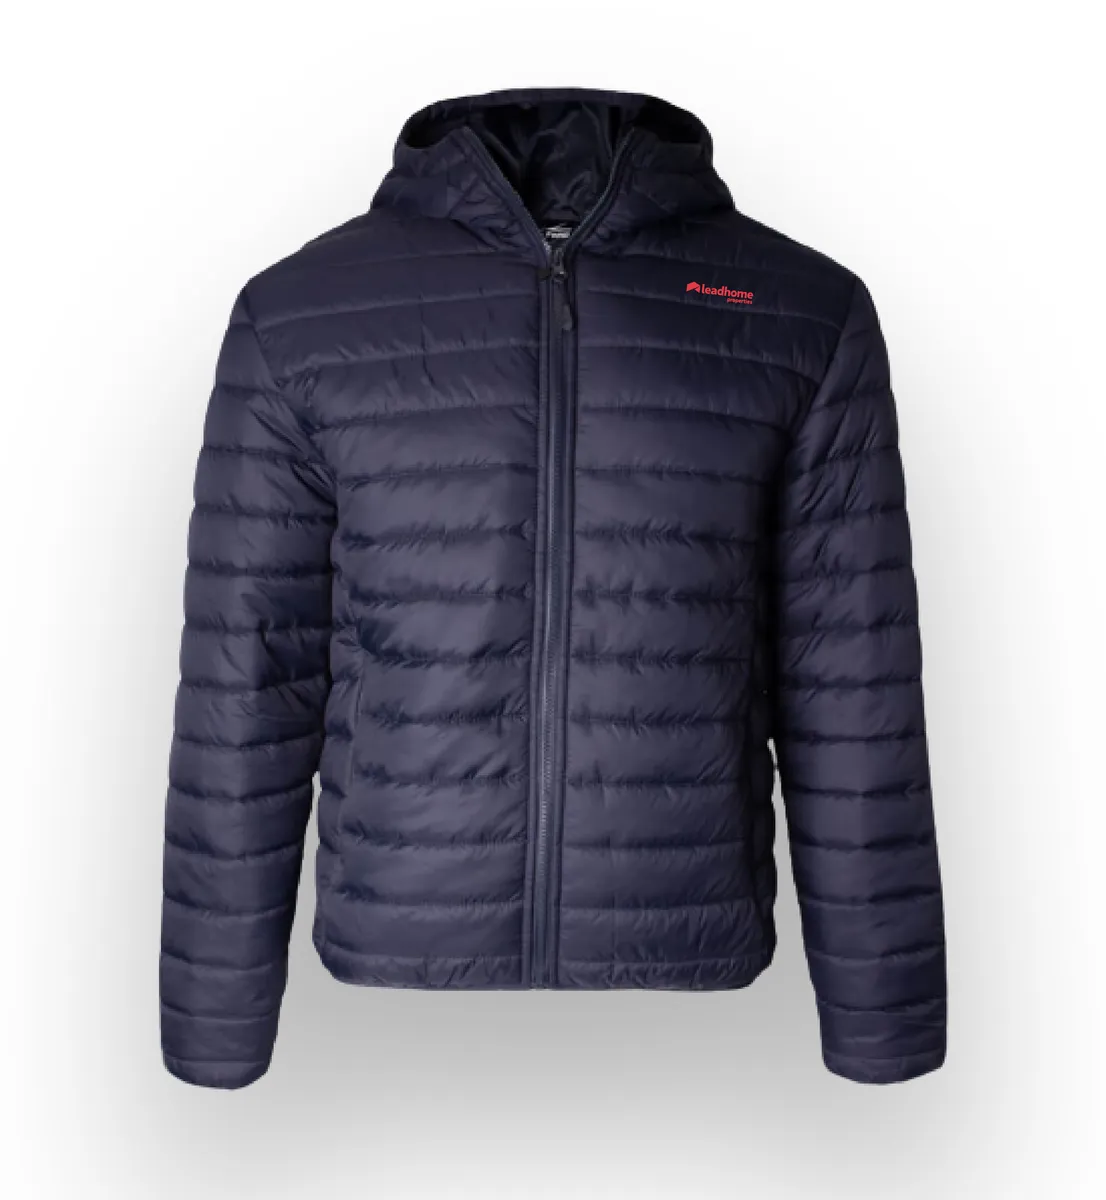 Leadhome Branded Puffer Jackets 